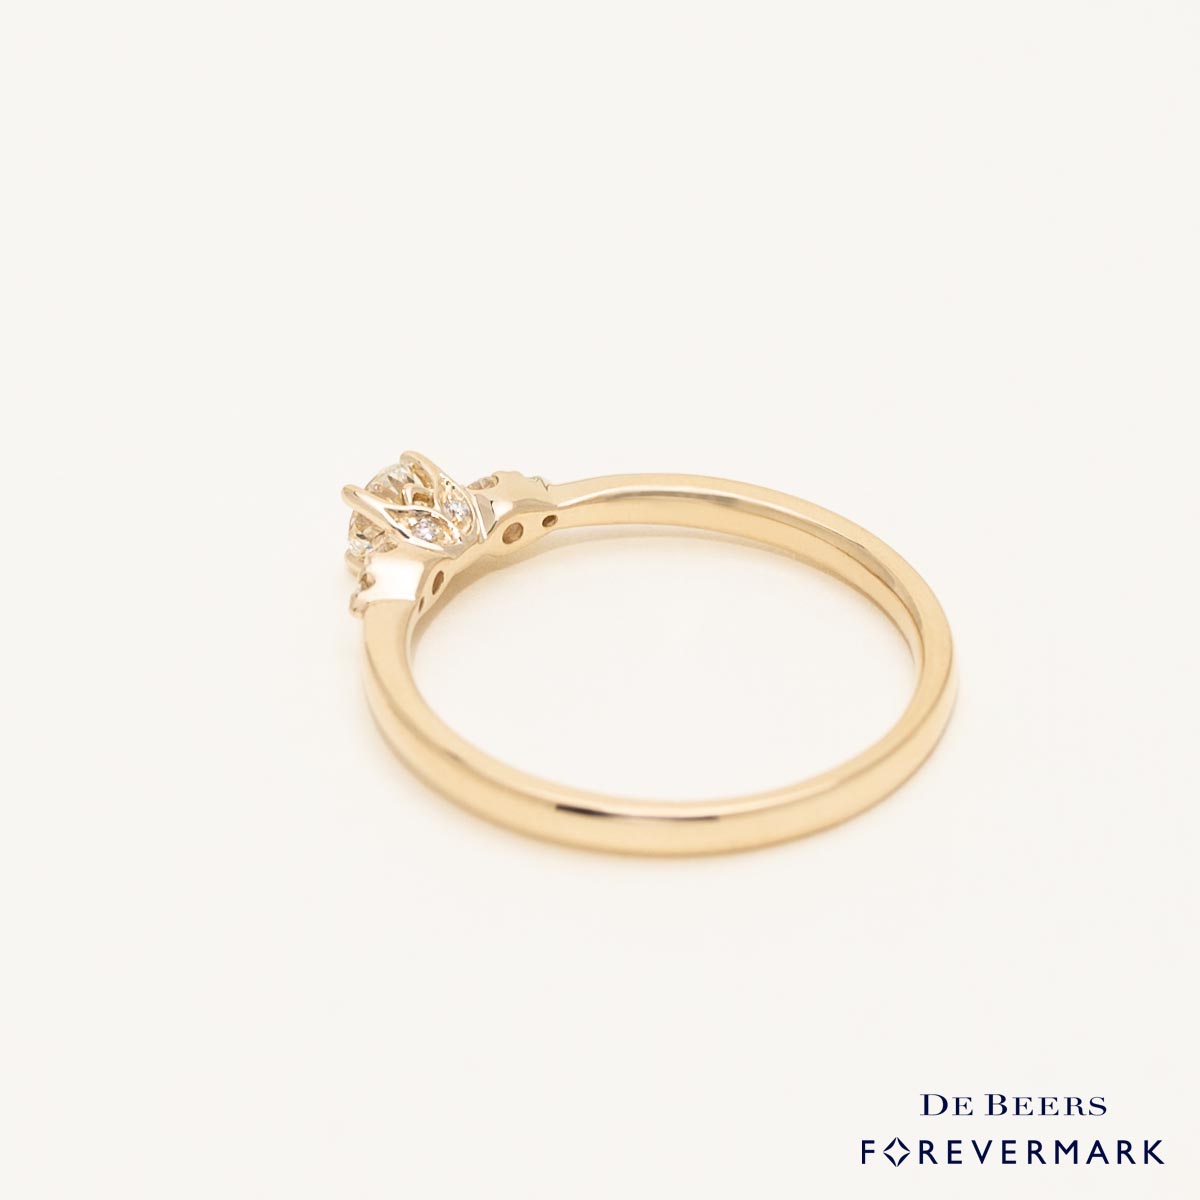 De Beers Forevermark Diamond Engagement Ring in 14kt Yellow Gold (1/3ct tw)